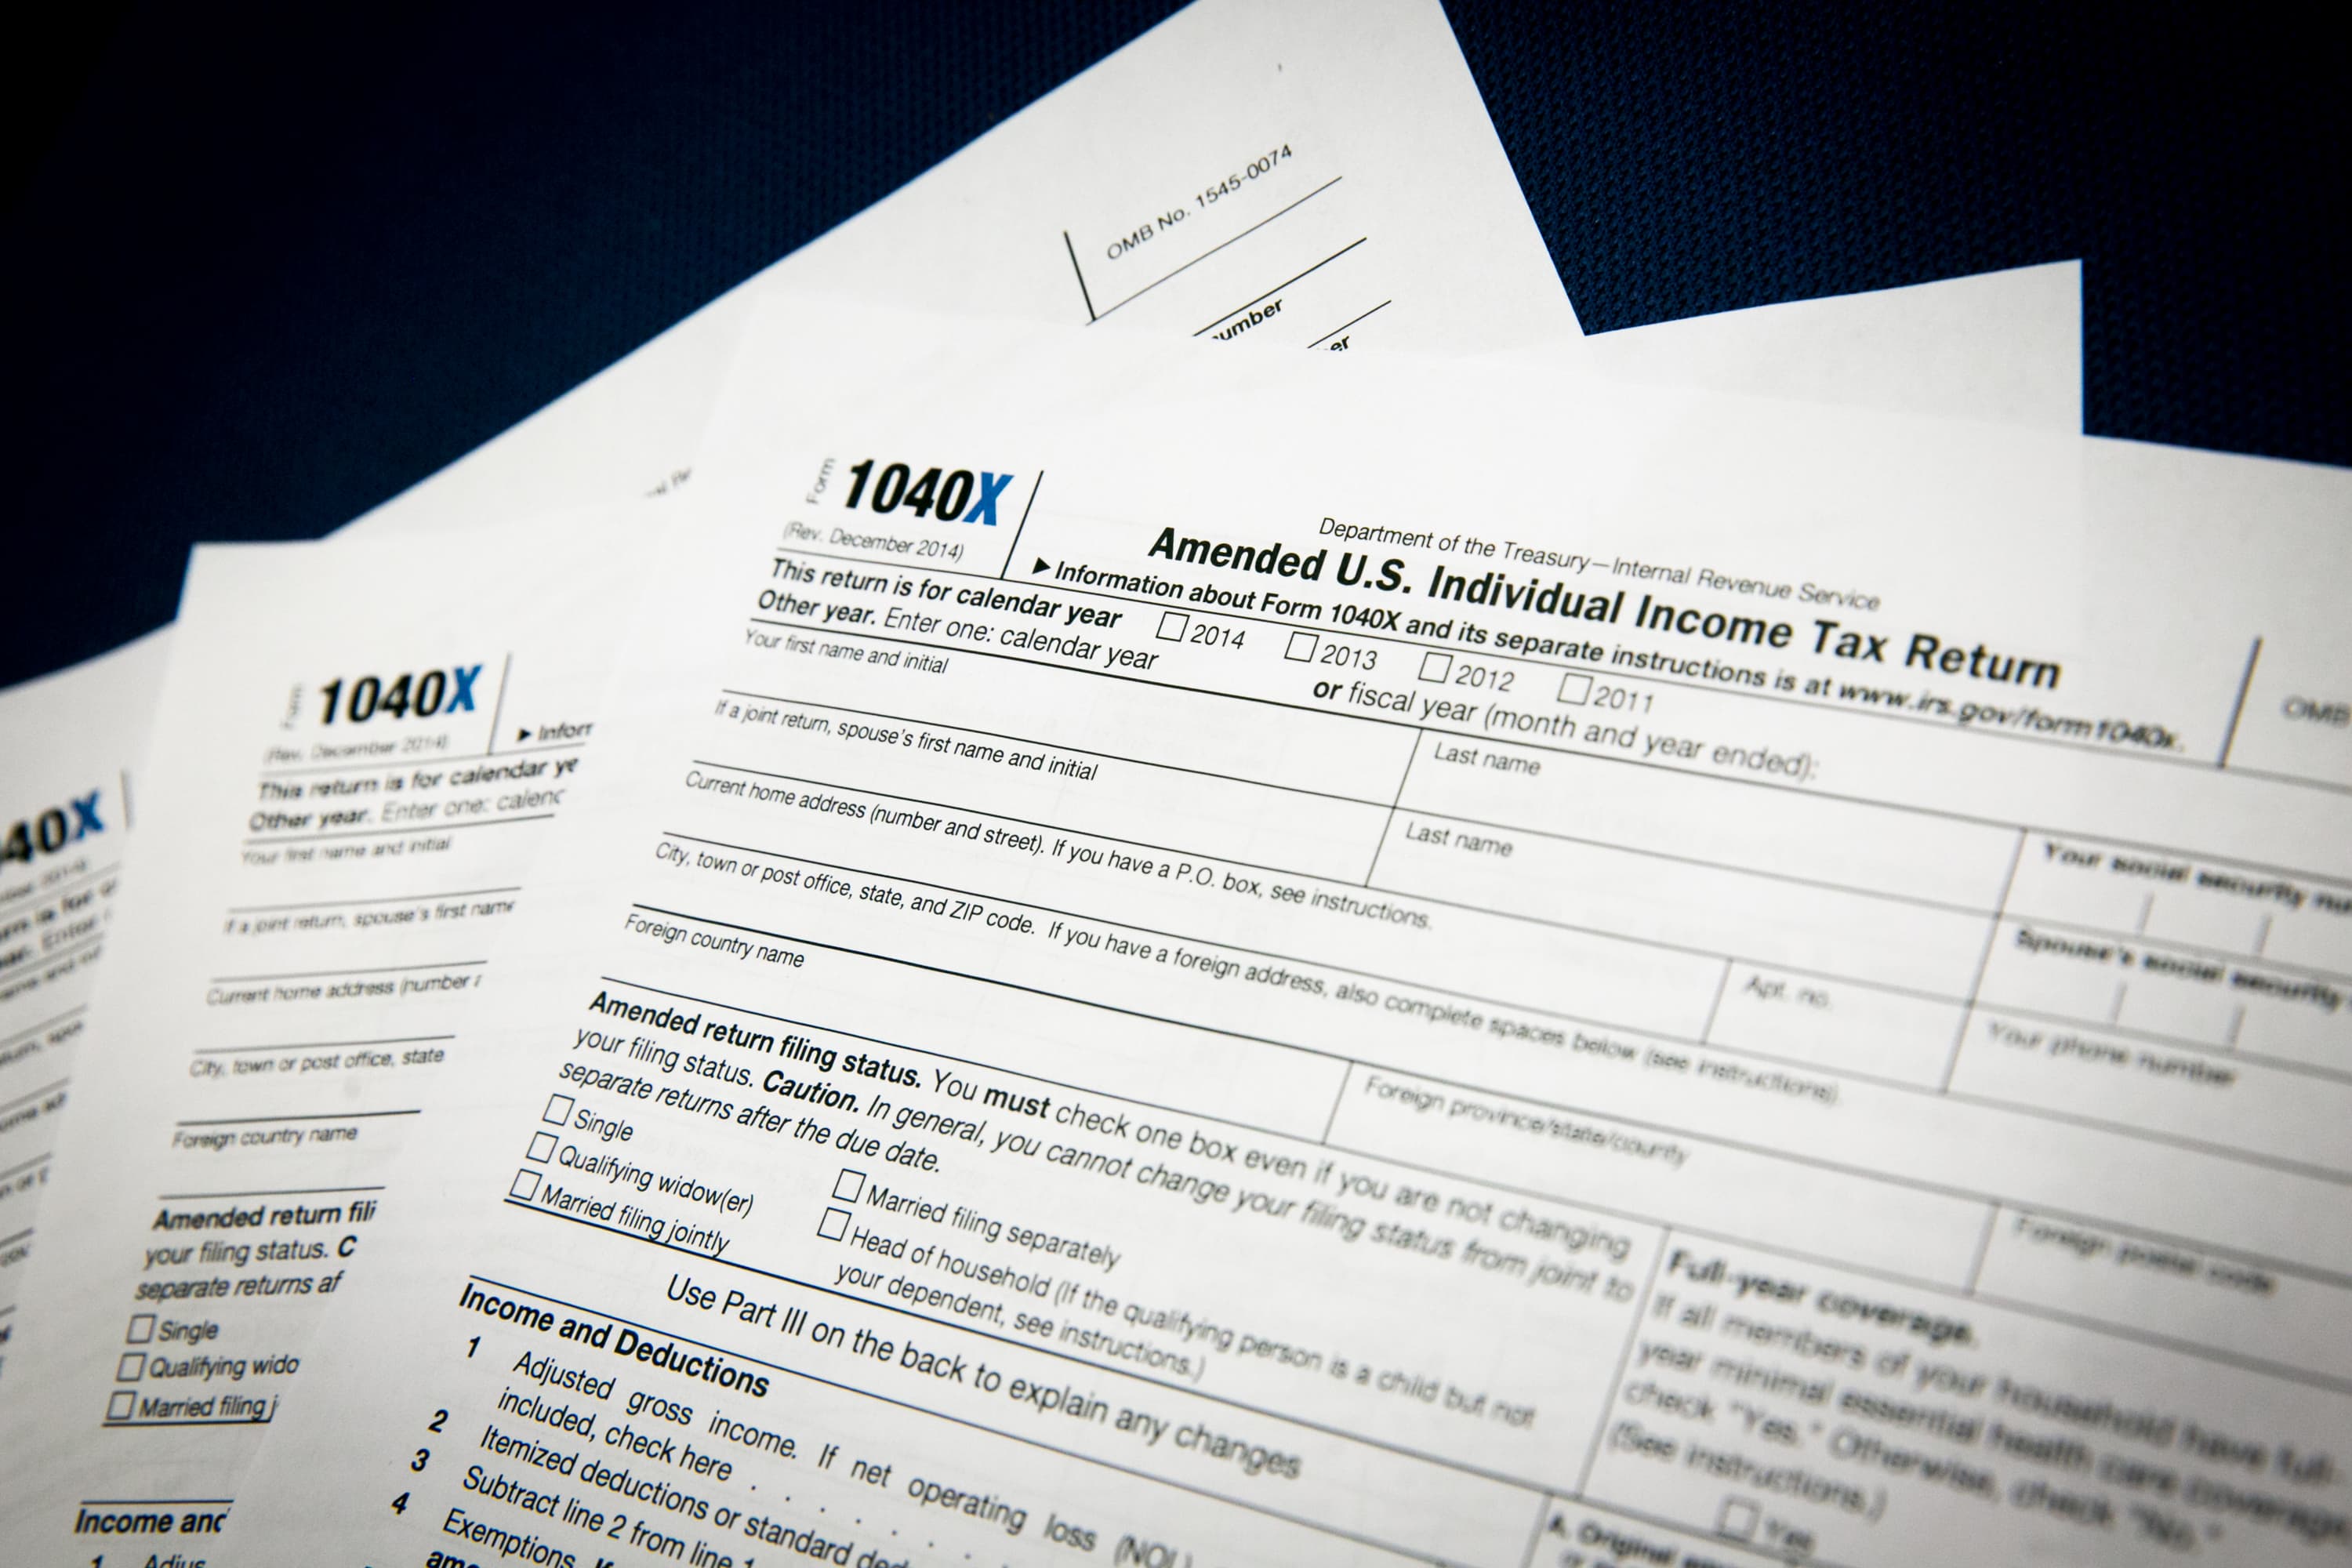 How to file an amended tax return